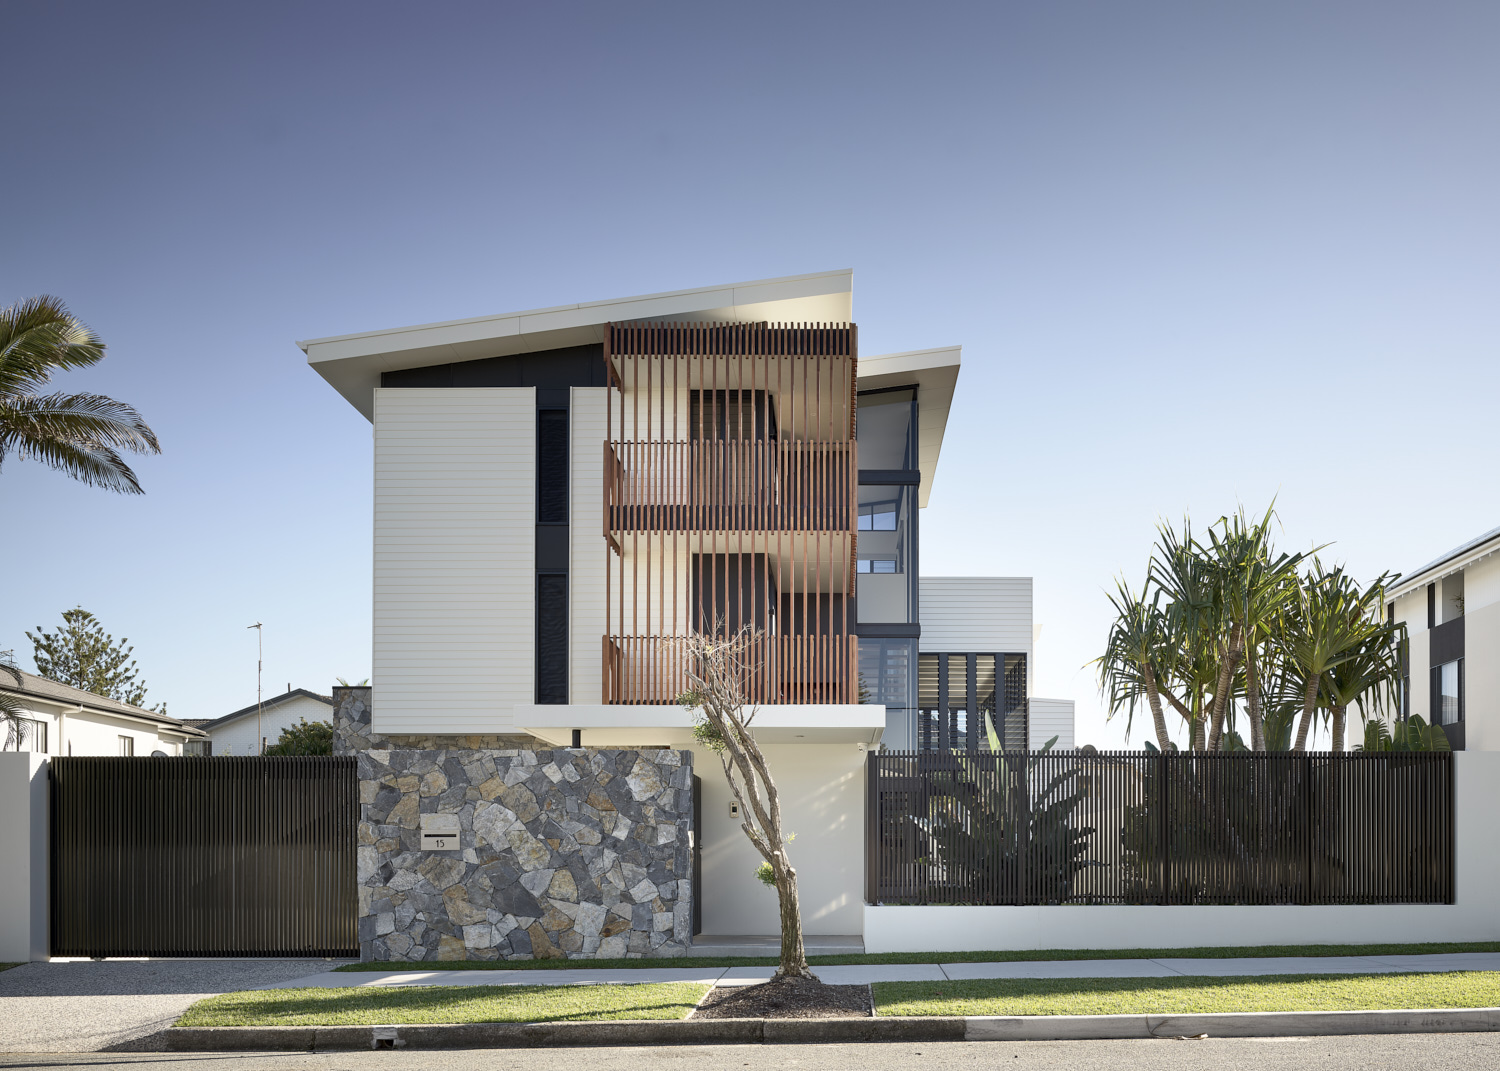 ARTHUR STREET FRONT FACADE & FRONT FENCE | PHOTO BY    SCOTT BURROWS